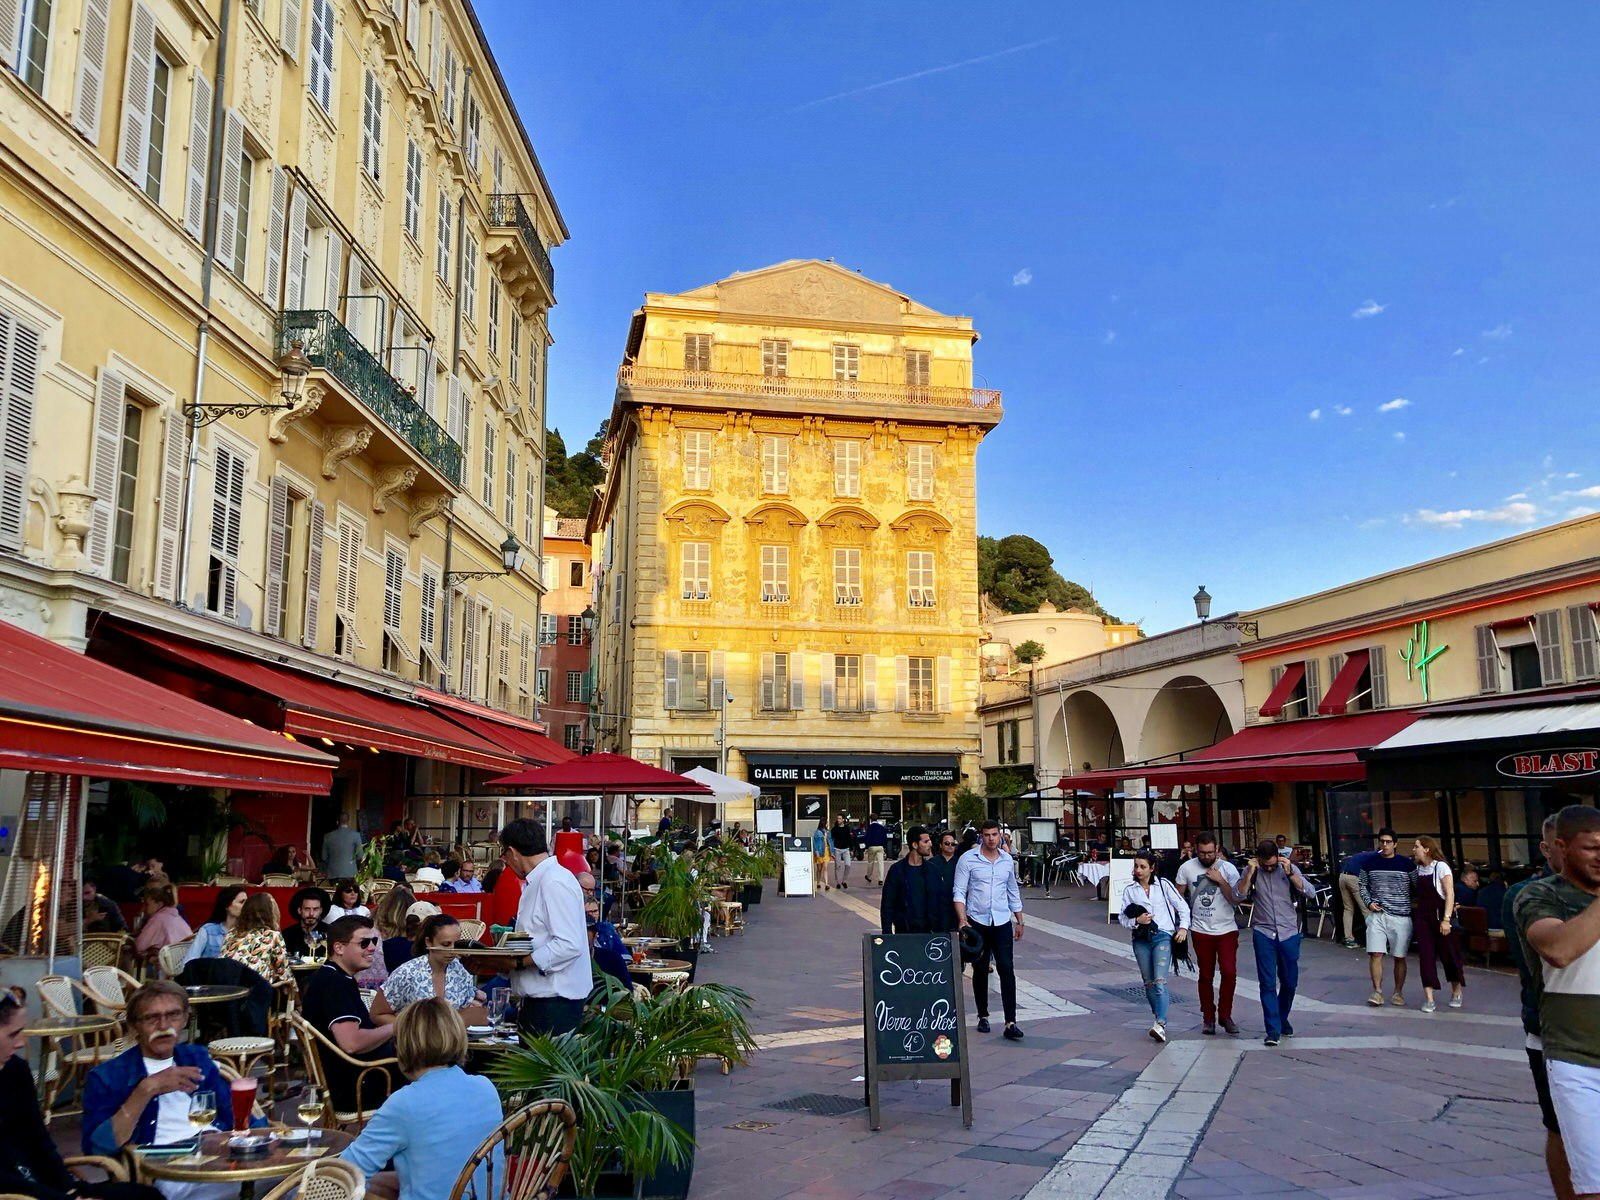 A pedestrian street in Old Nice at sunset. There are lots of outside tables for restaurants filled with people and others are walking down the street with the light hitting off a building in the background.